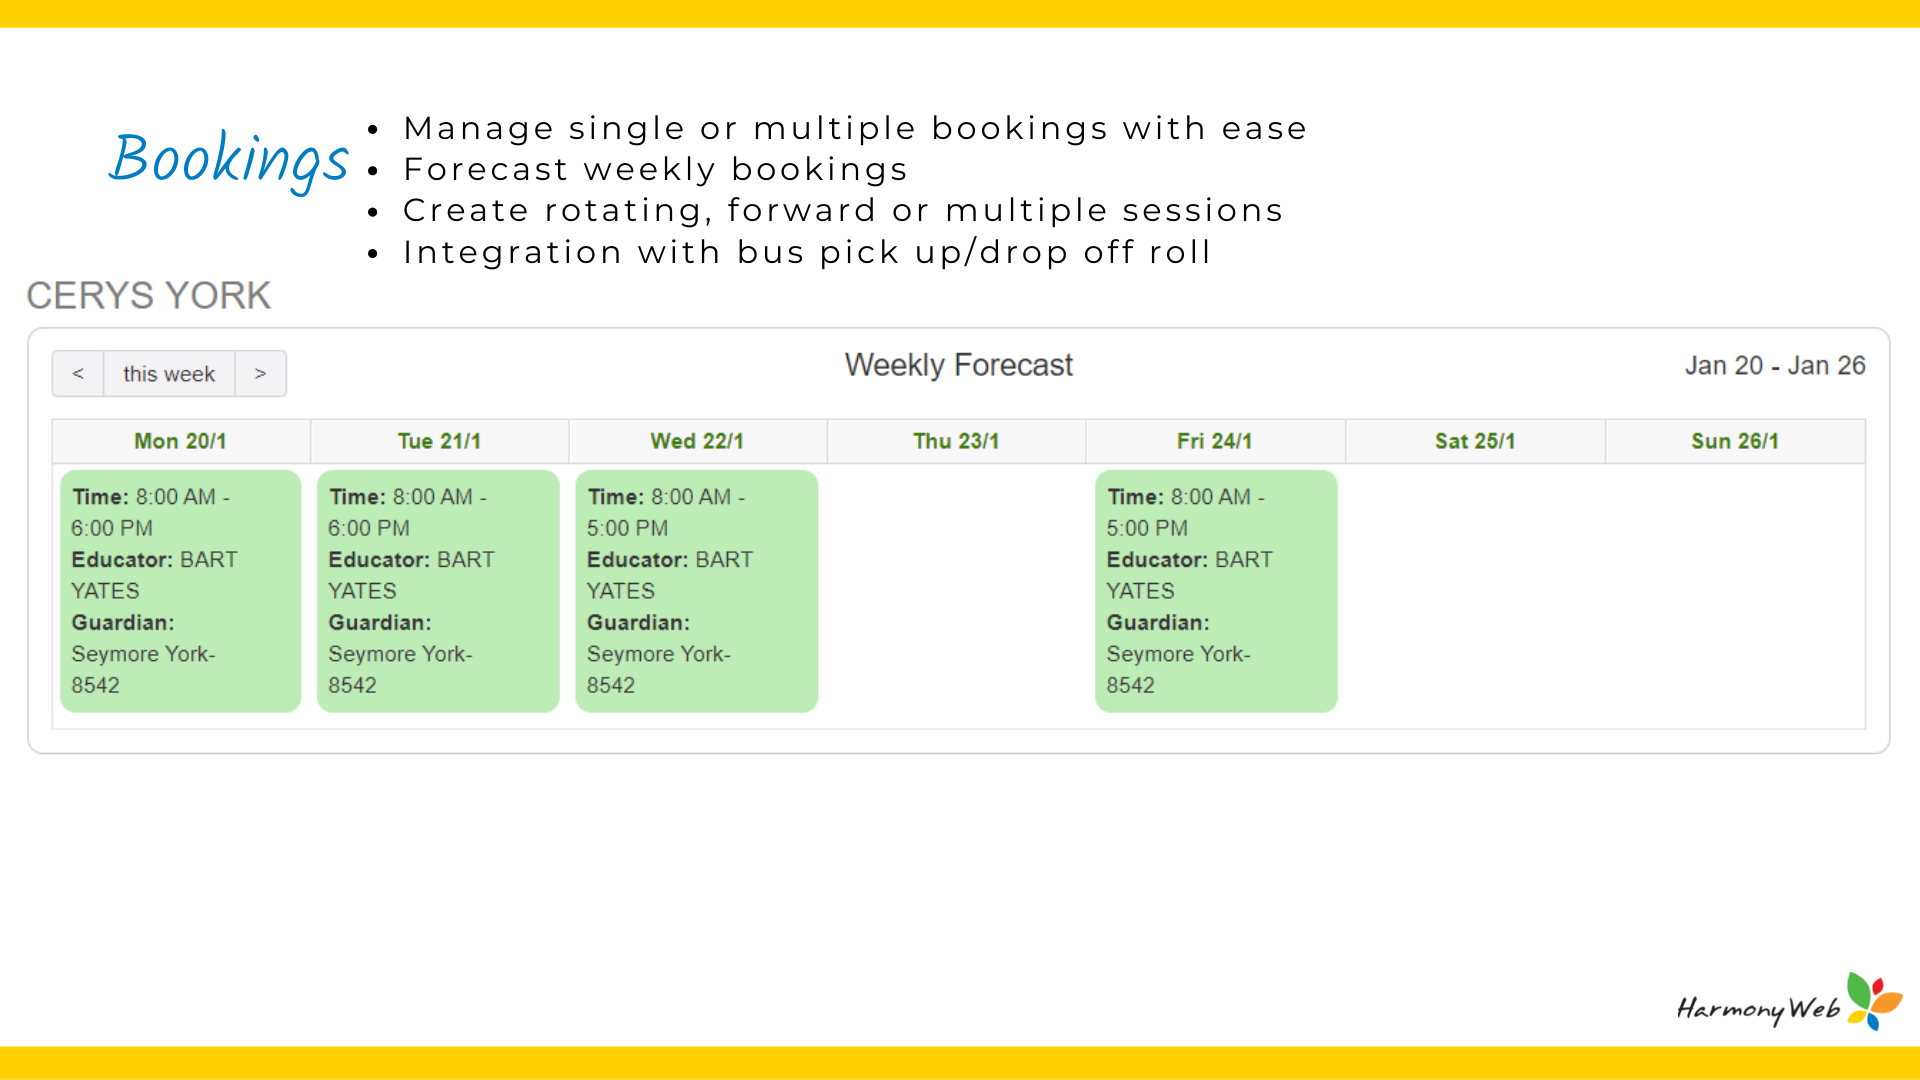 Manage your bookings easily with Harmony Web.